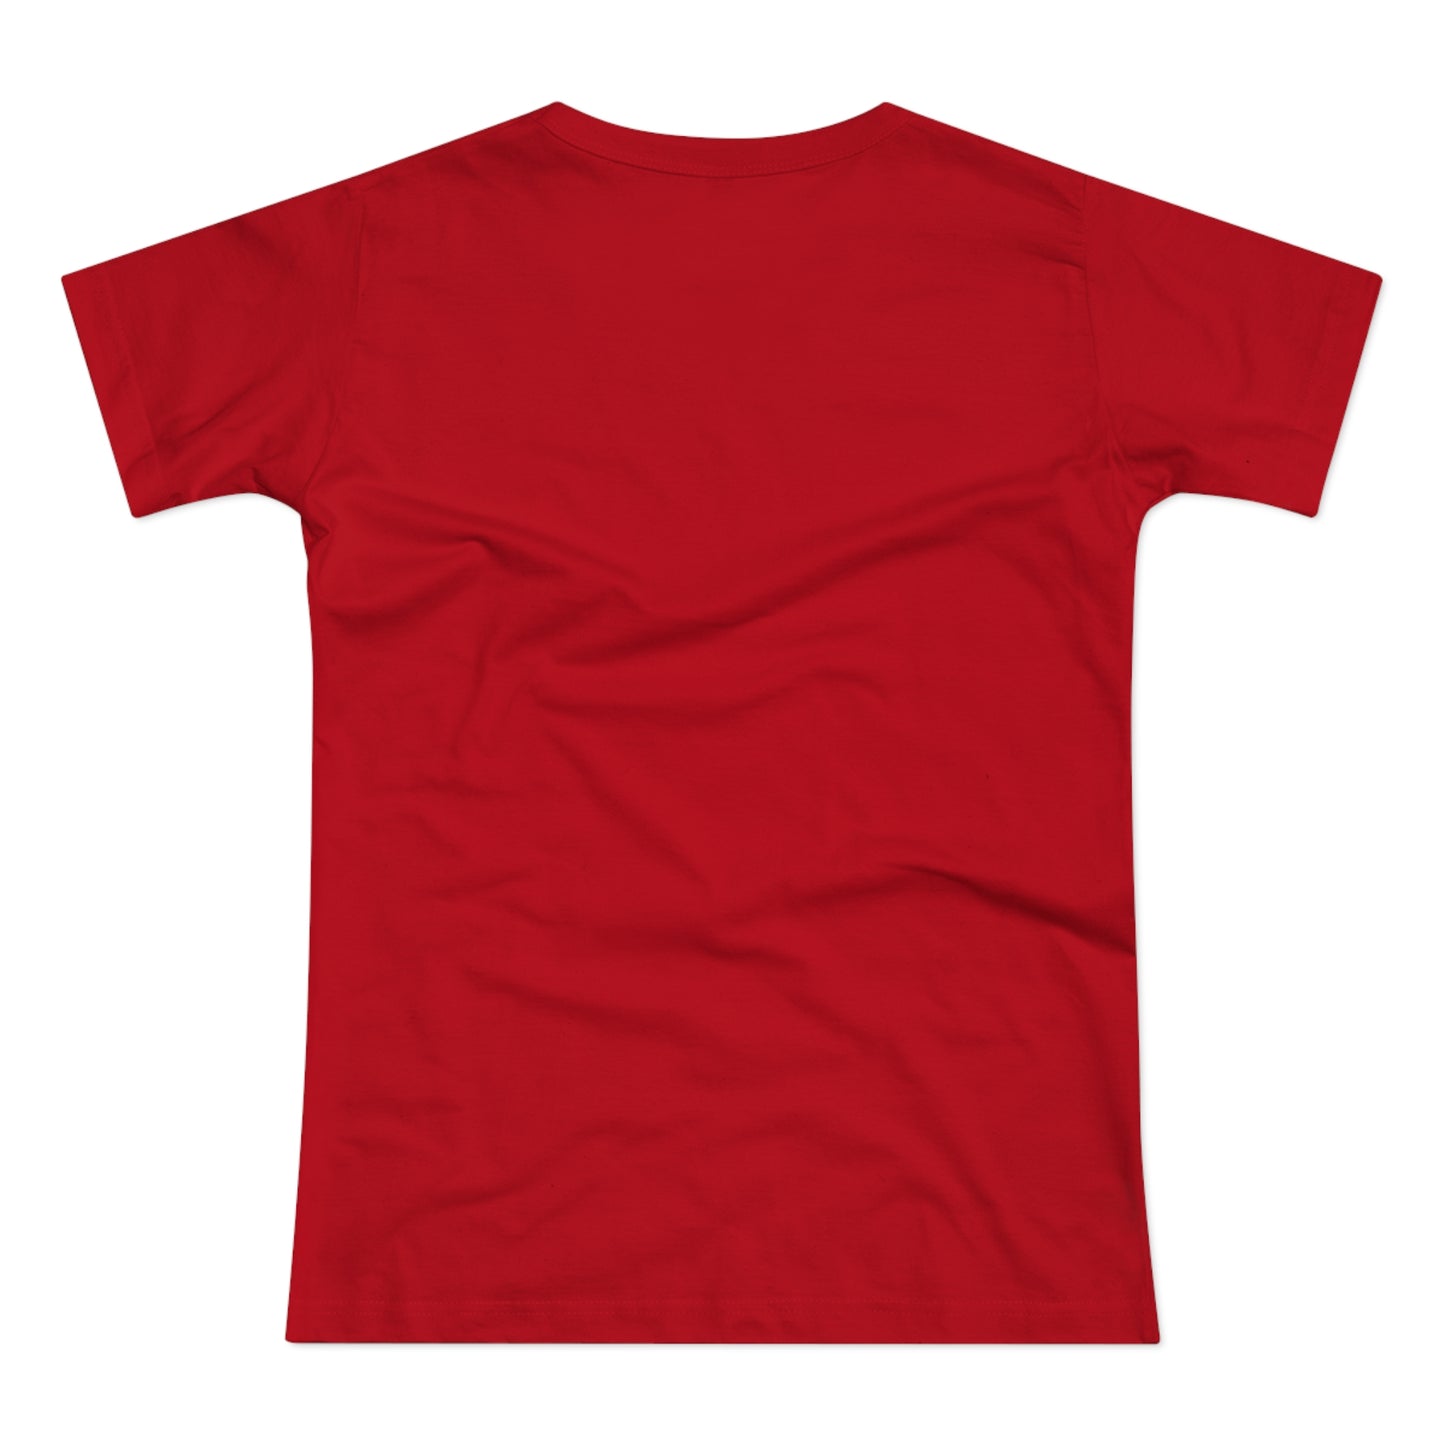 a red t - shirt on a white background